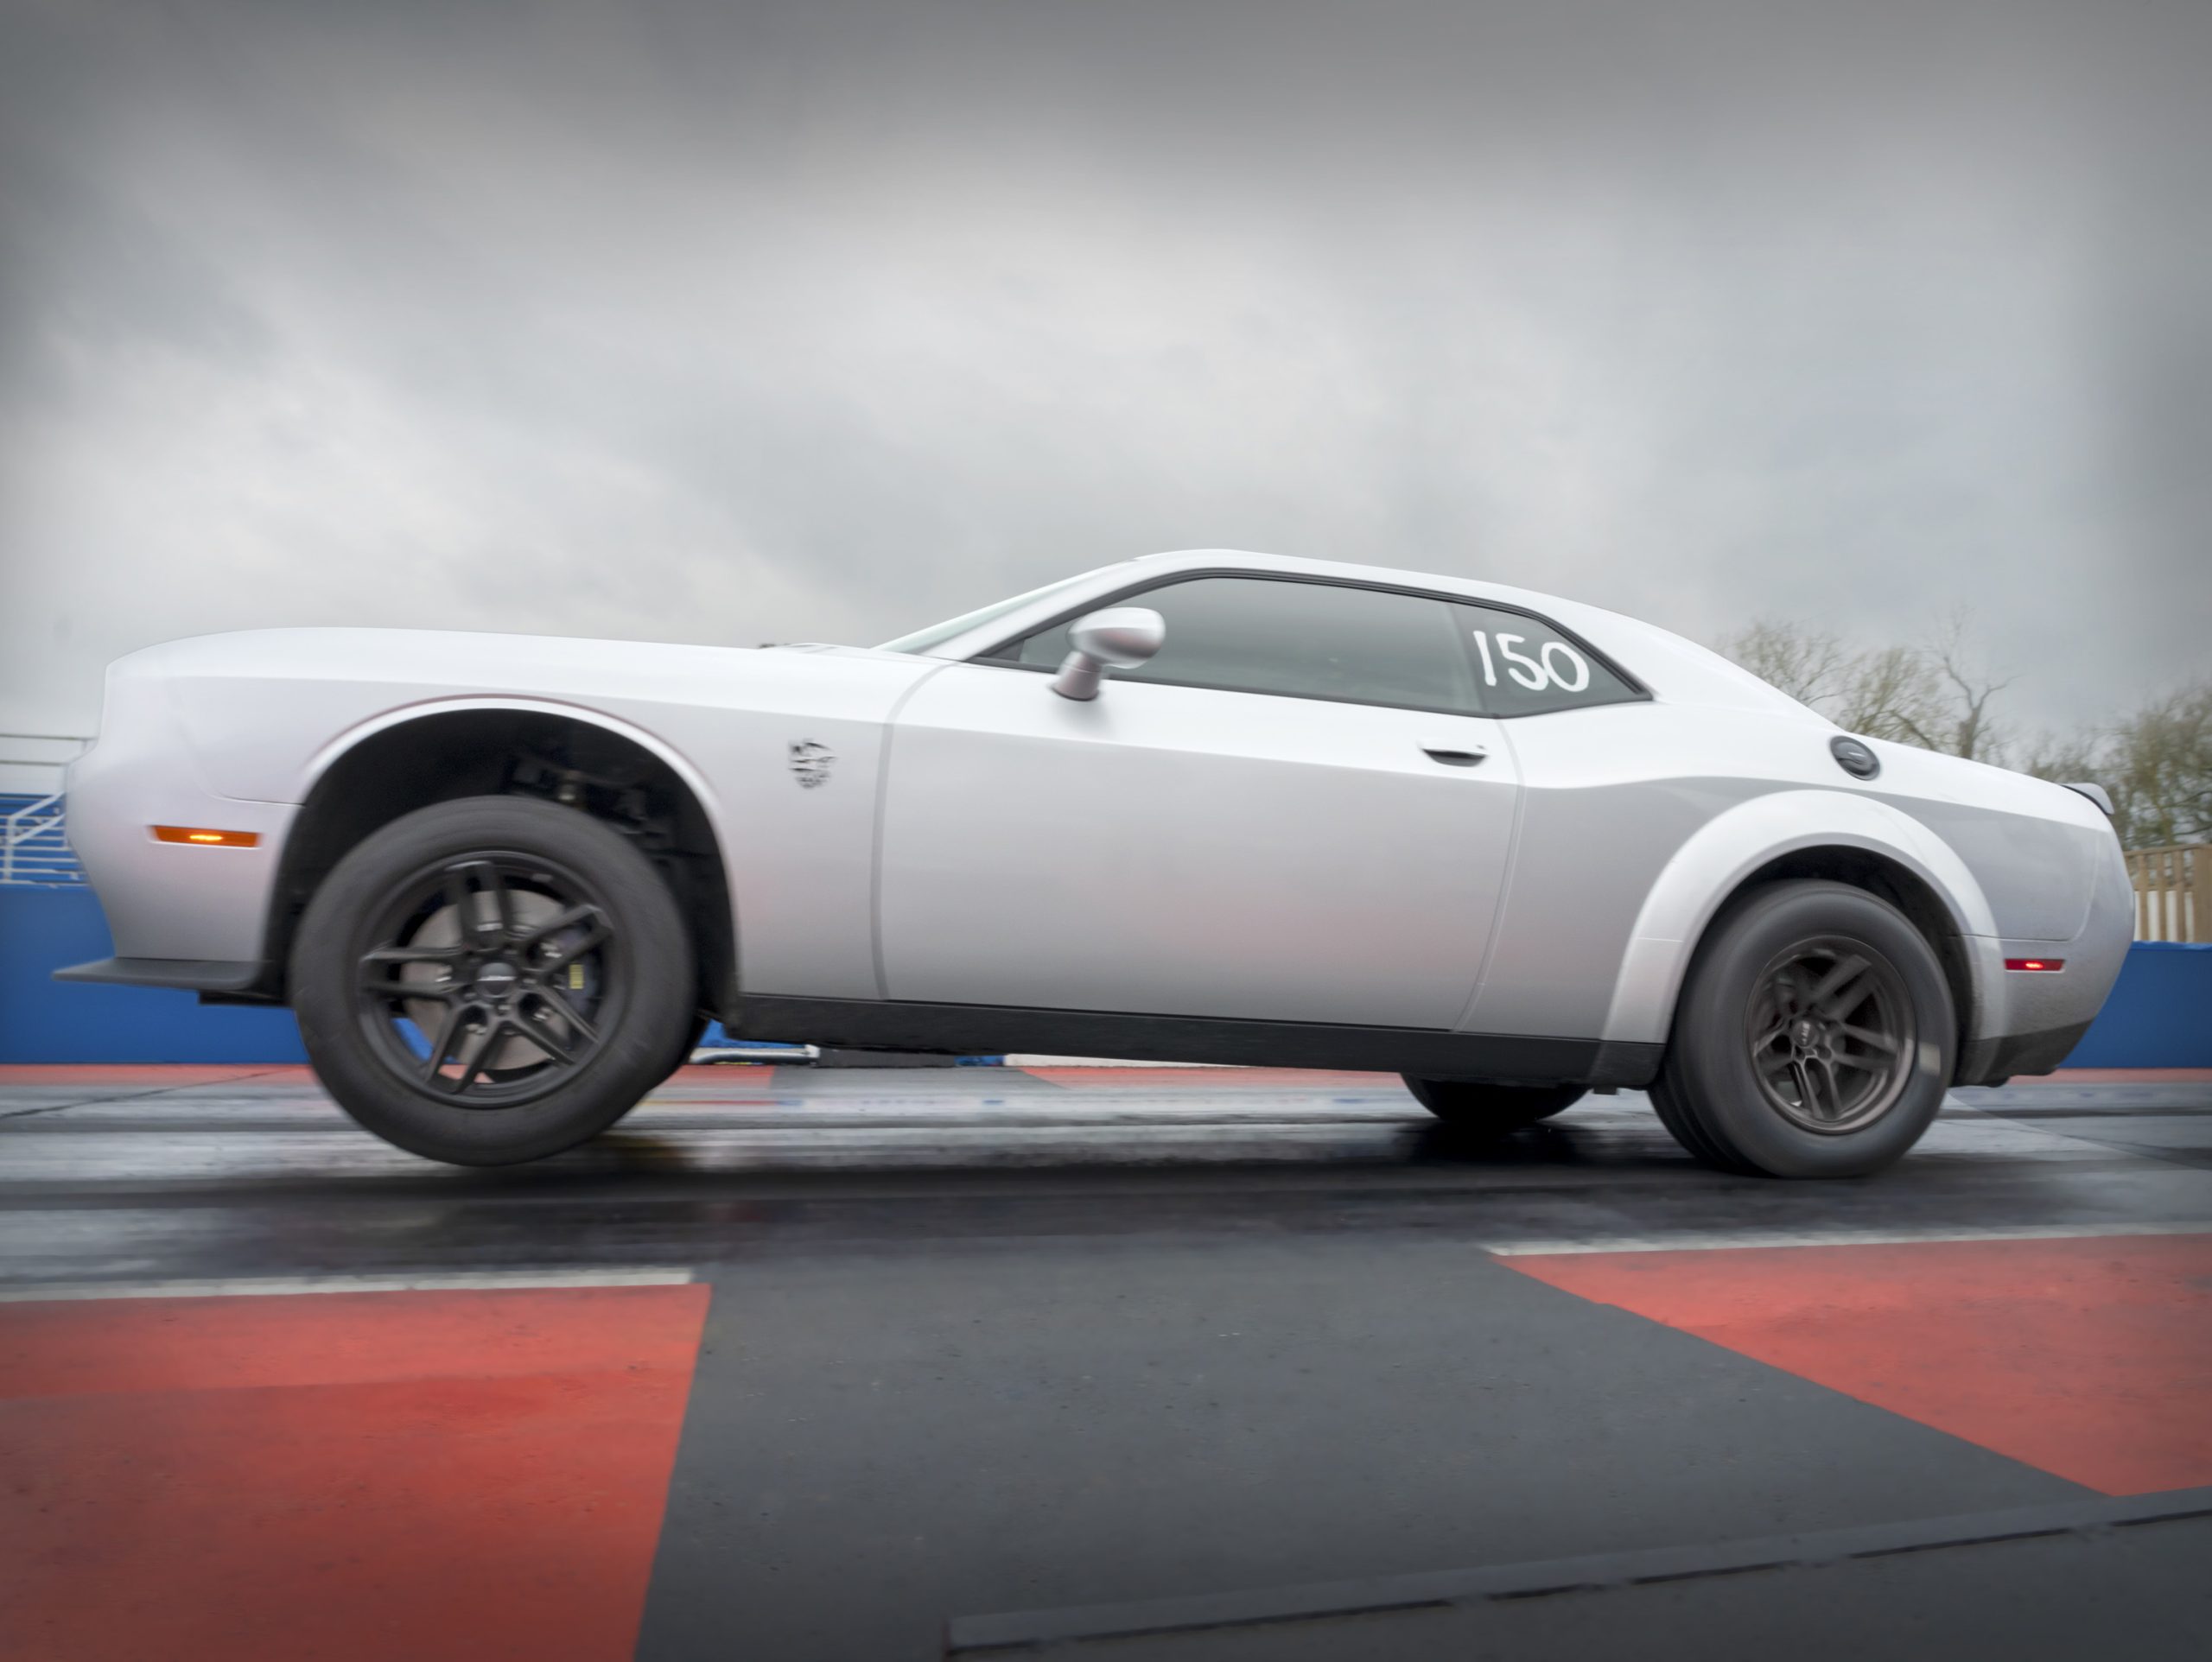 Dodge's Final "Last Call" Vehicle Revealed The 1,025 HP Dodge